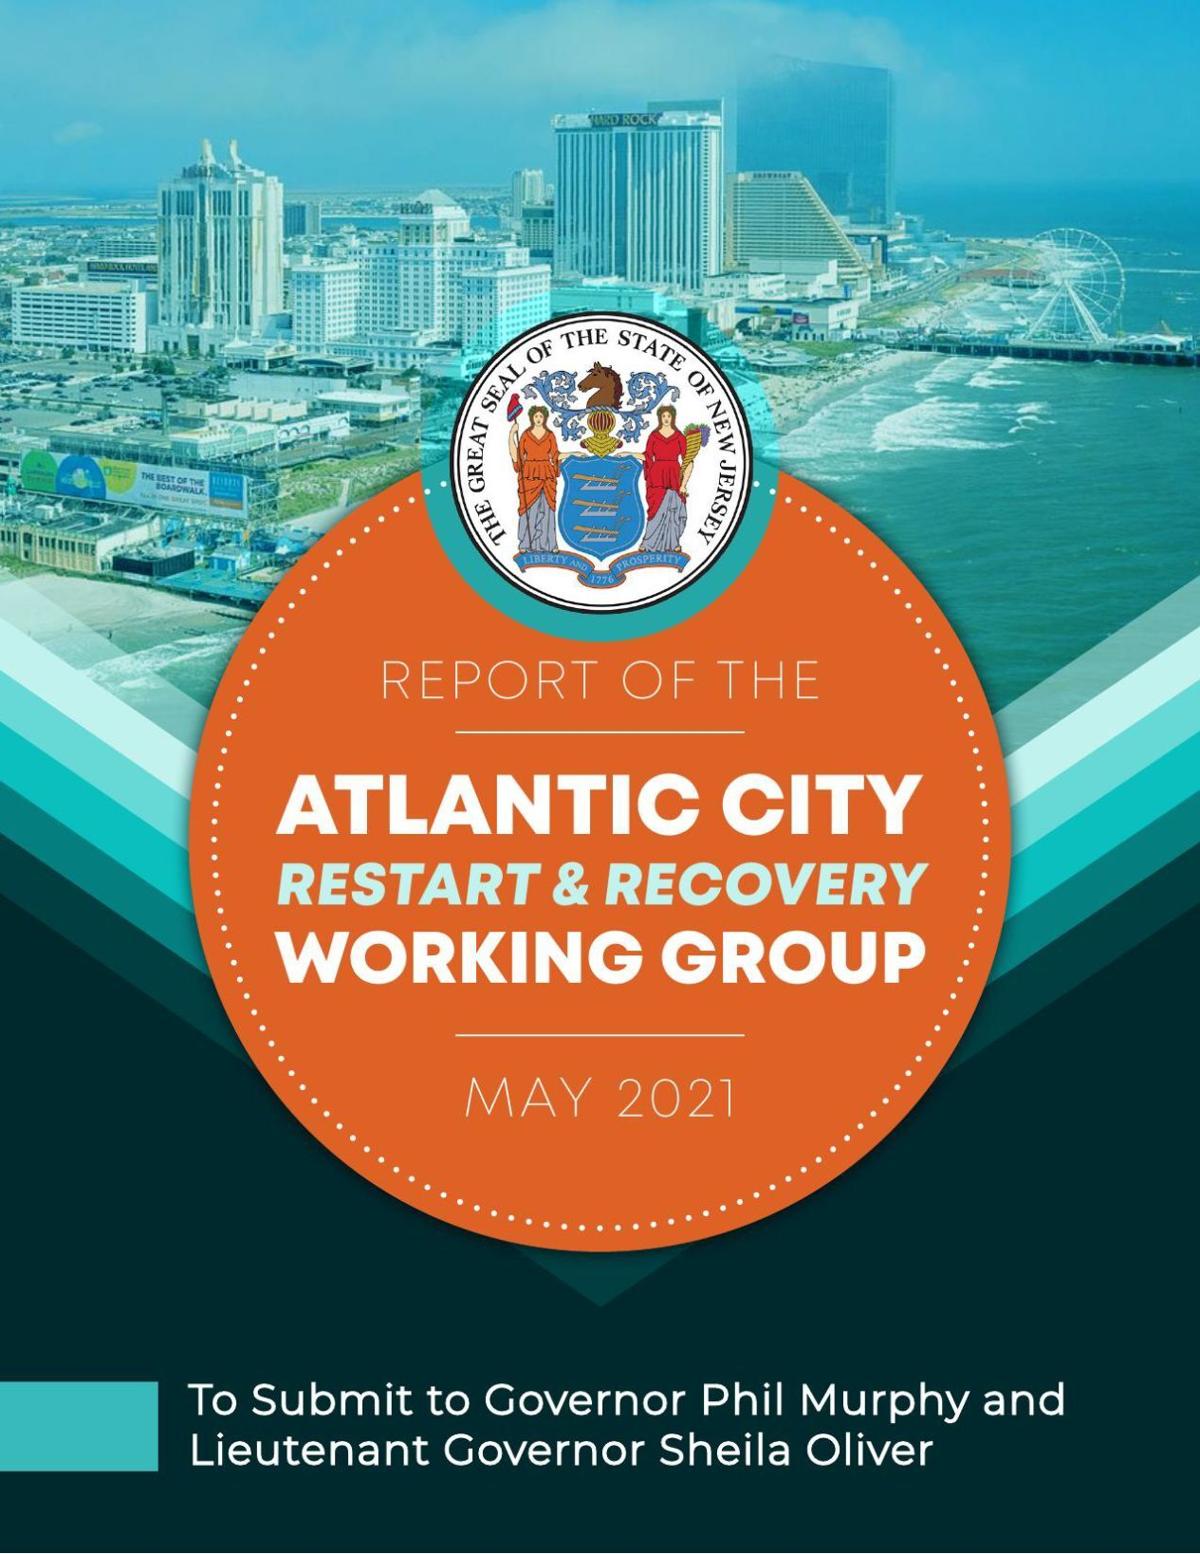 Atlantic City Working Group Report - May 2021